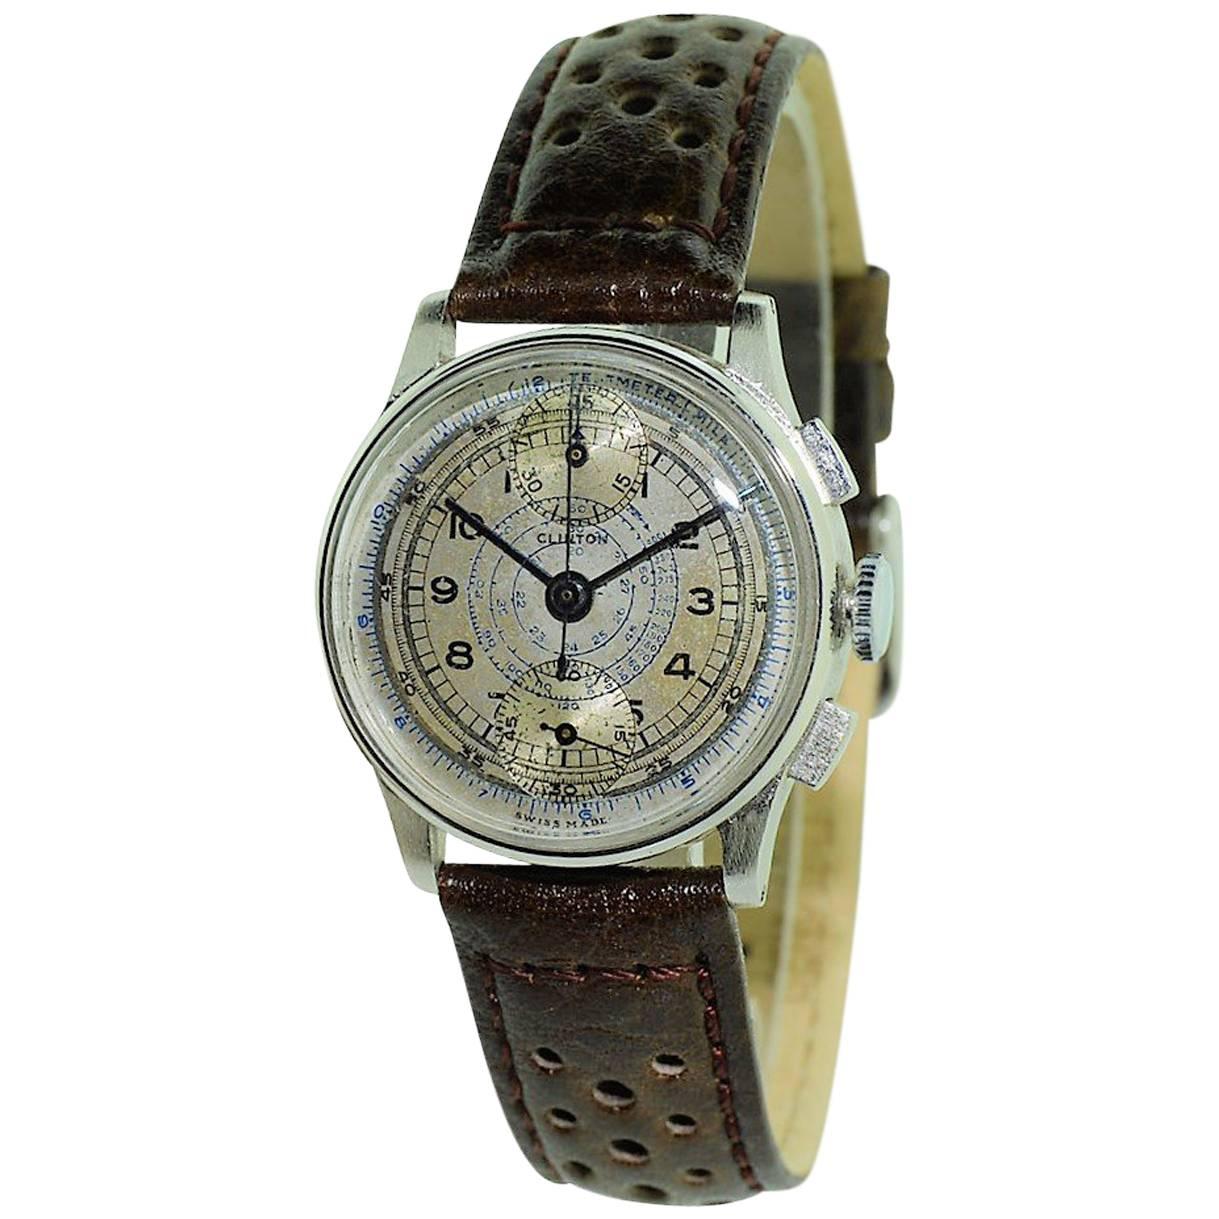 Clinton by Buren Stainless Steel Chronograph Manual Wind Wristwatch